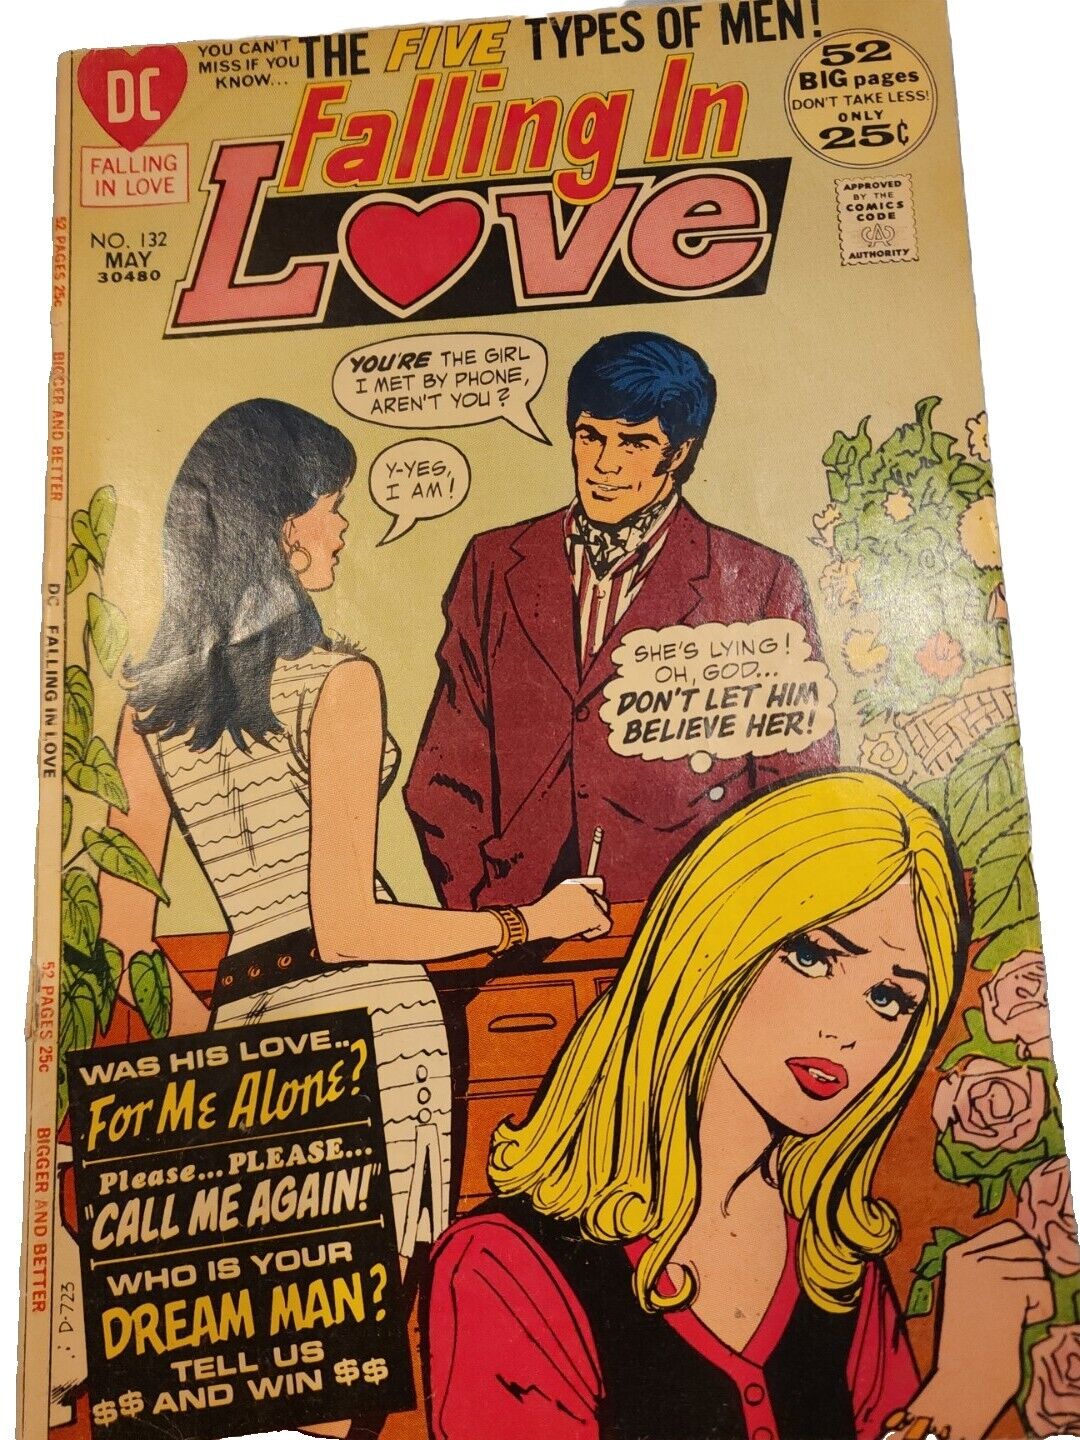 Vintage May 1972 Falling In Love No. 132 DC Comics Published By Dorothy Woolfolk